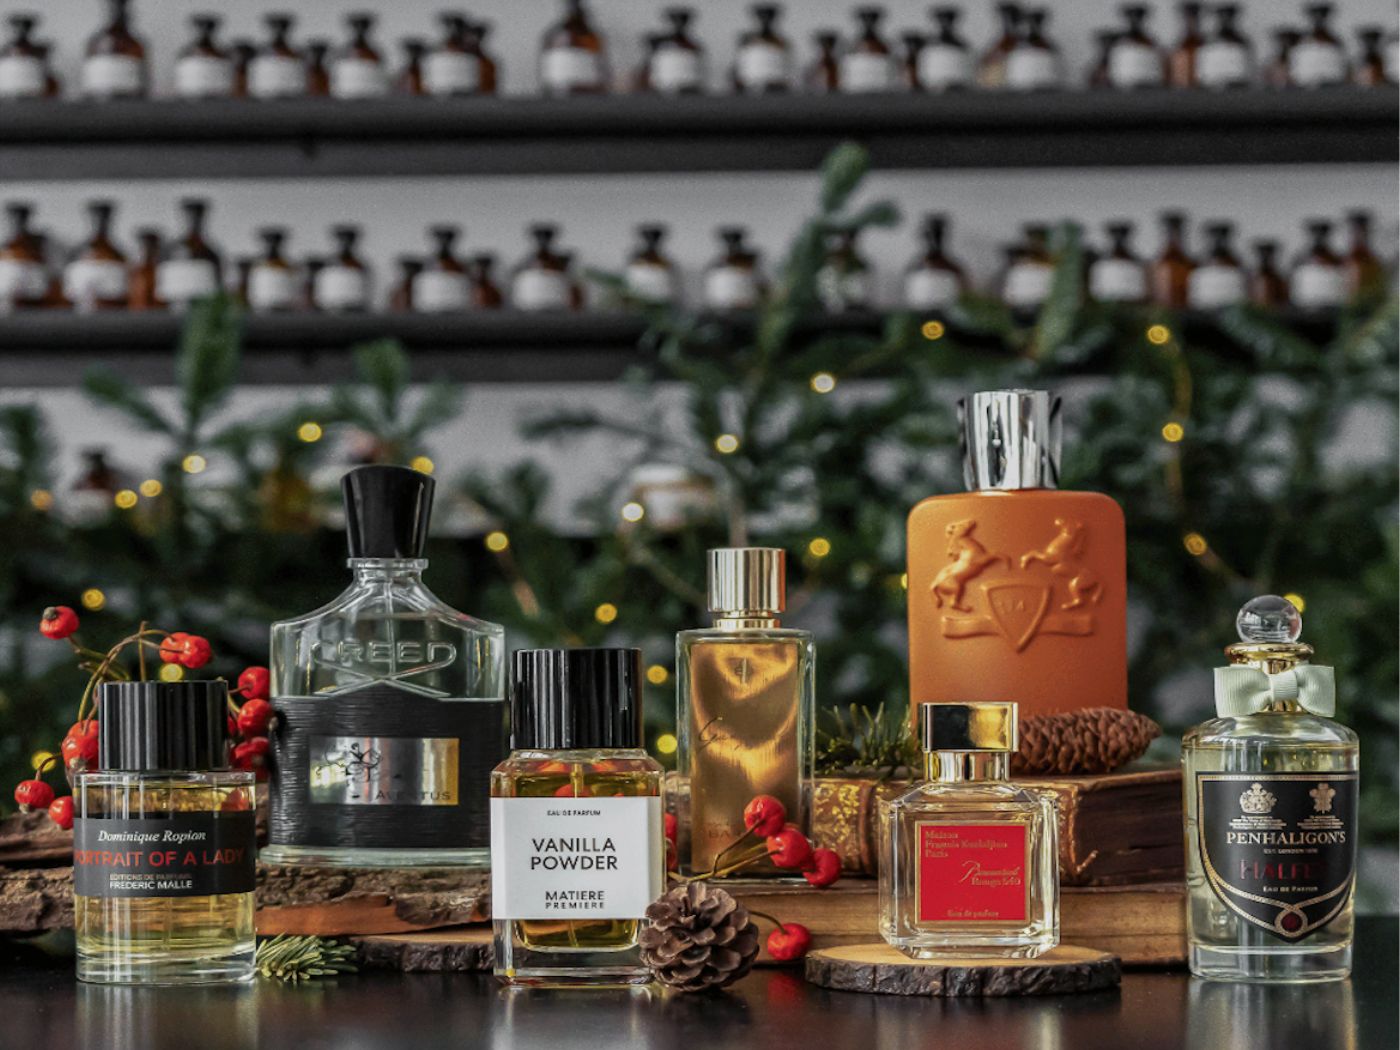 A selection of perfume bottles arranged on a shelf, with festive foliage and fairy lights and apothecary style bottles on shelves in the background.